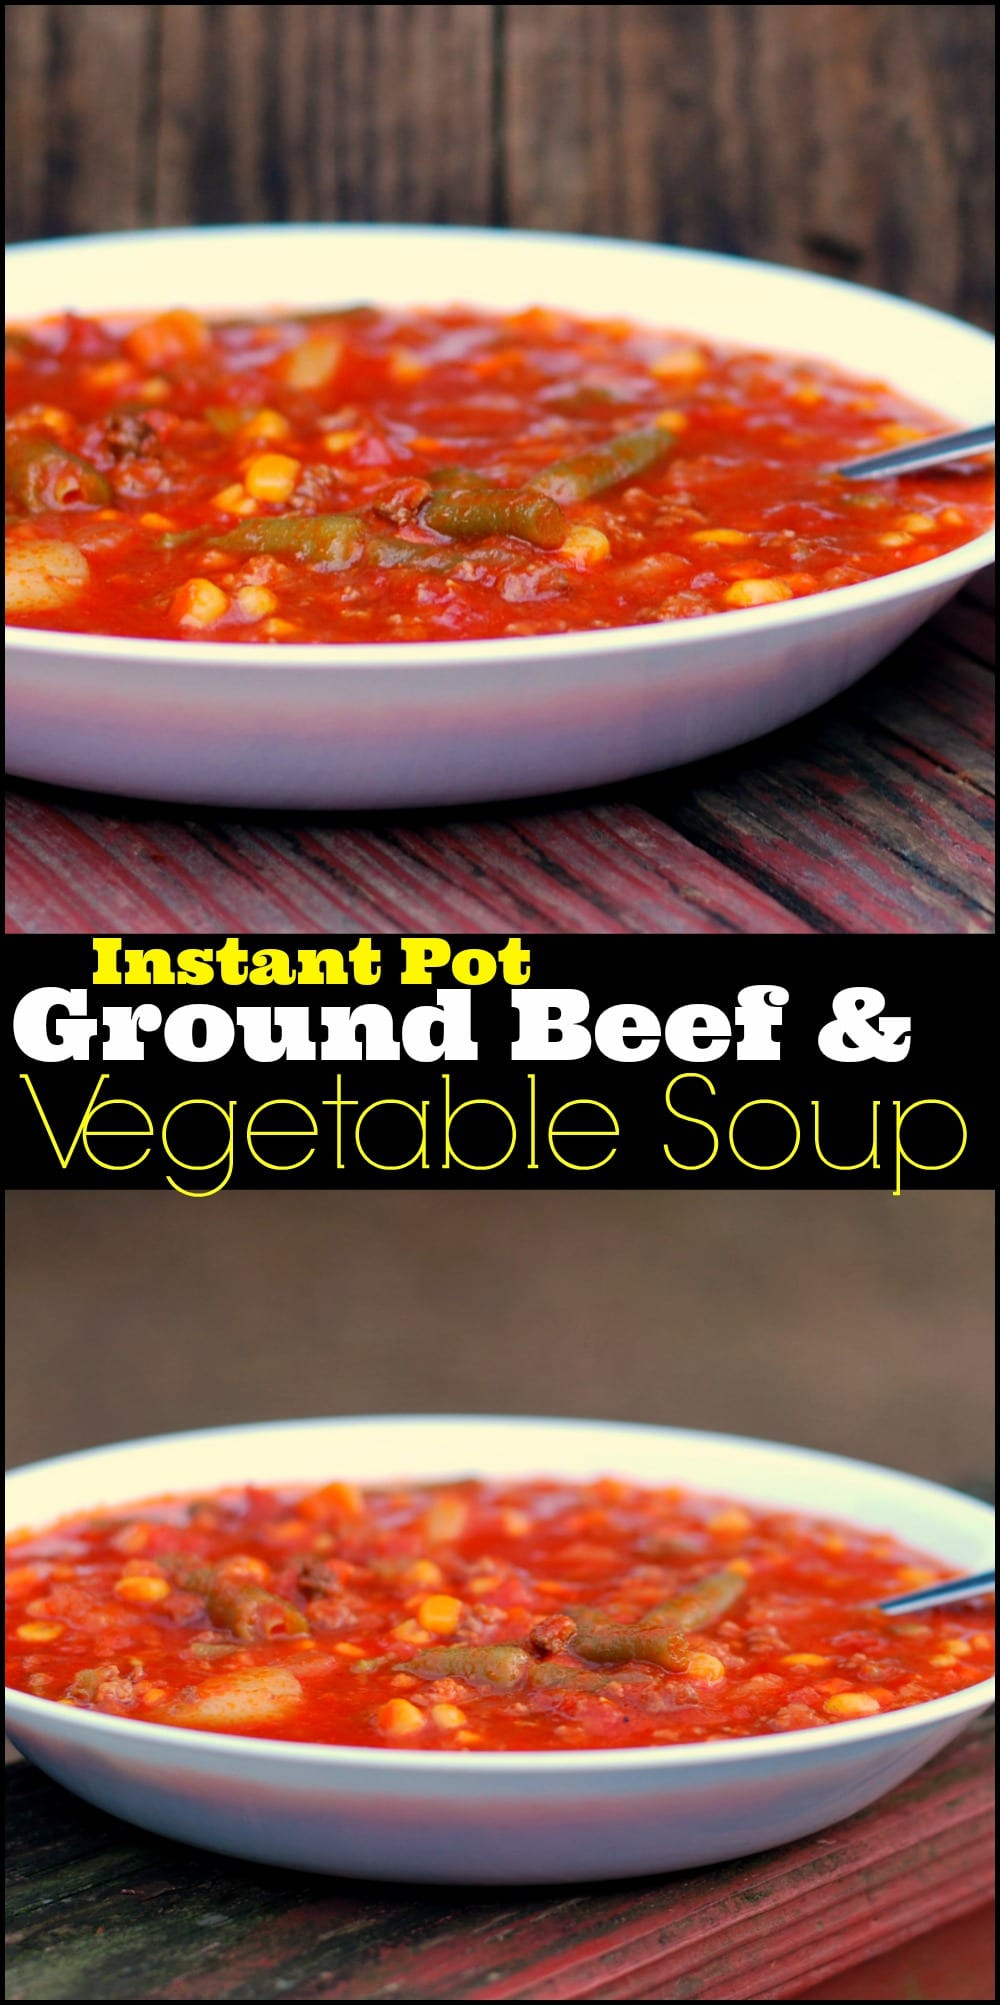 Beef Vegetable Soup Instant Pot
 Instant Pot Ground Beef & Ve able Soup Aunt Bee s Recipes